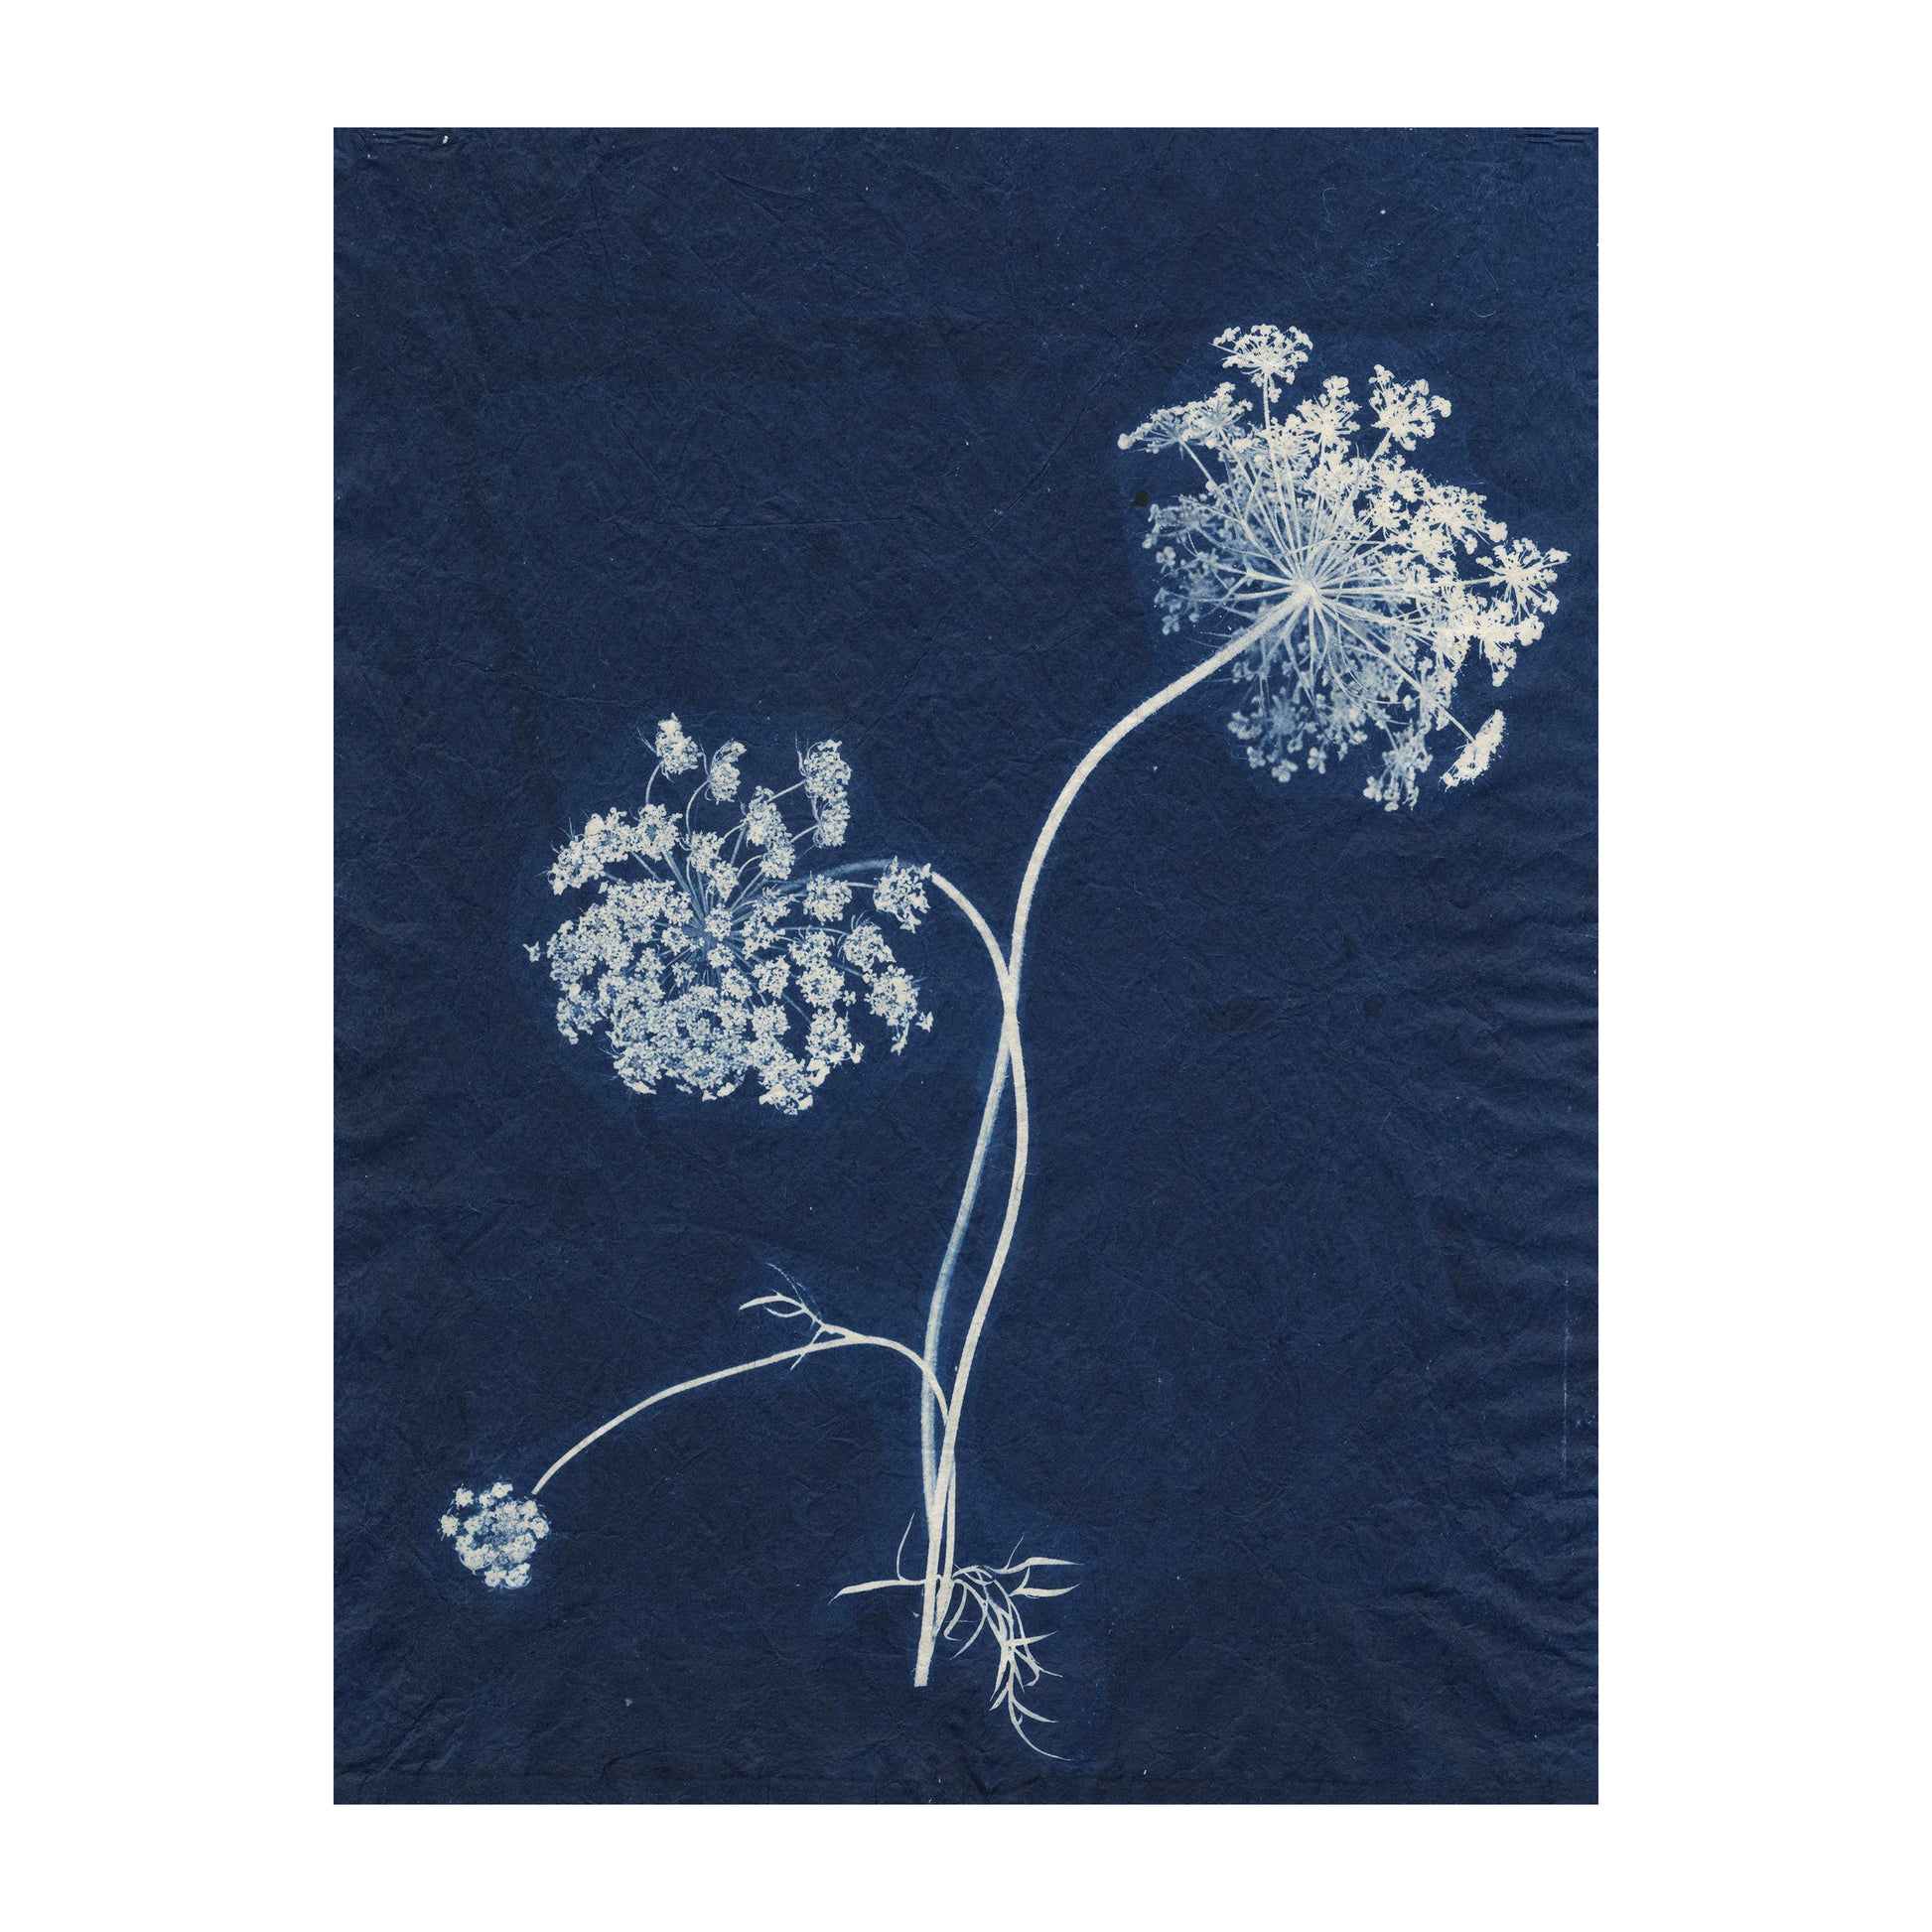 FUTURE PROOF 2023 Lot 3: Sally Ayre - Queen Ann's Lace #1